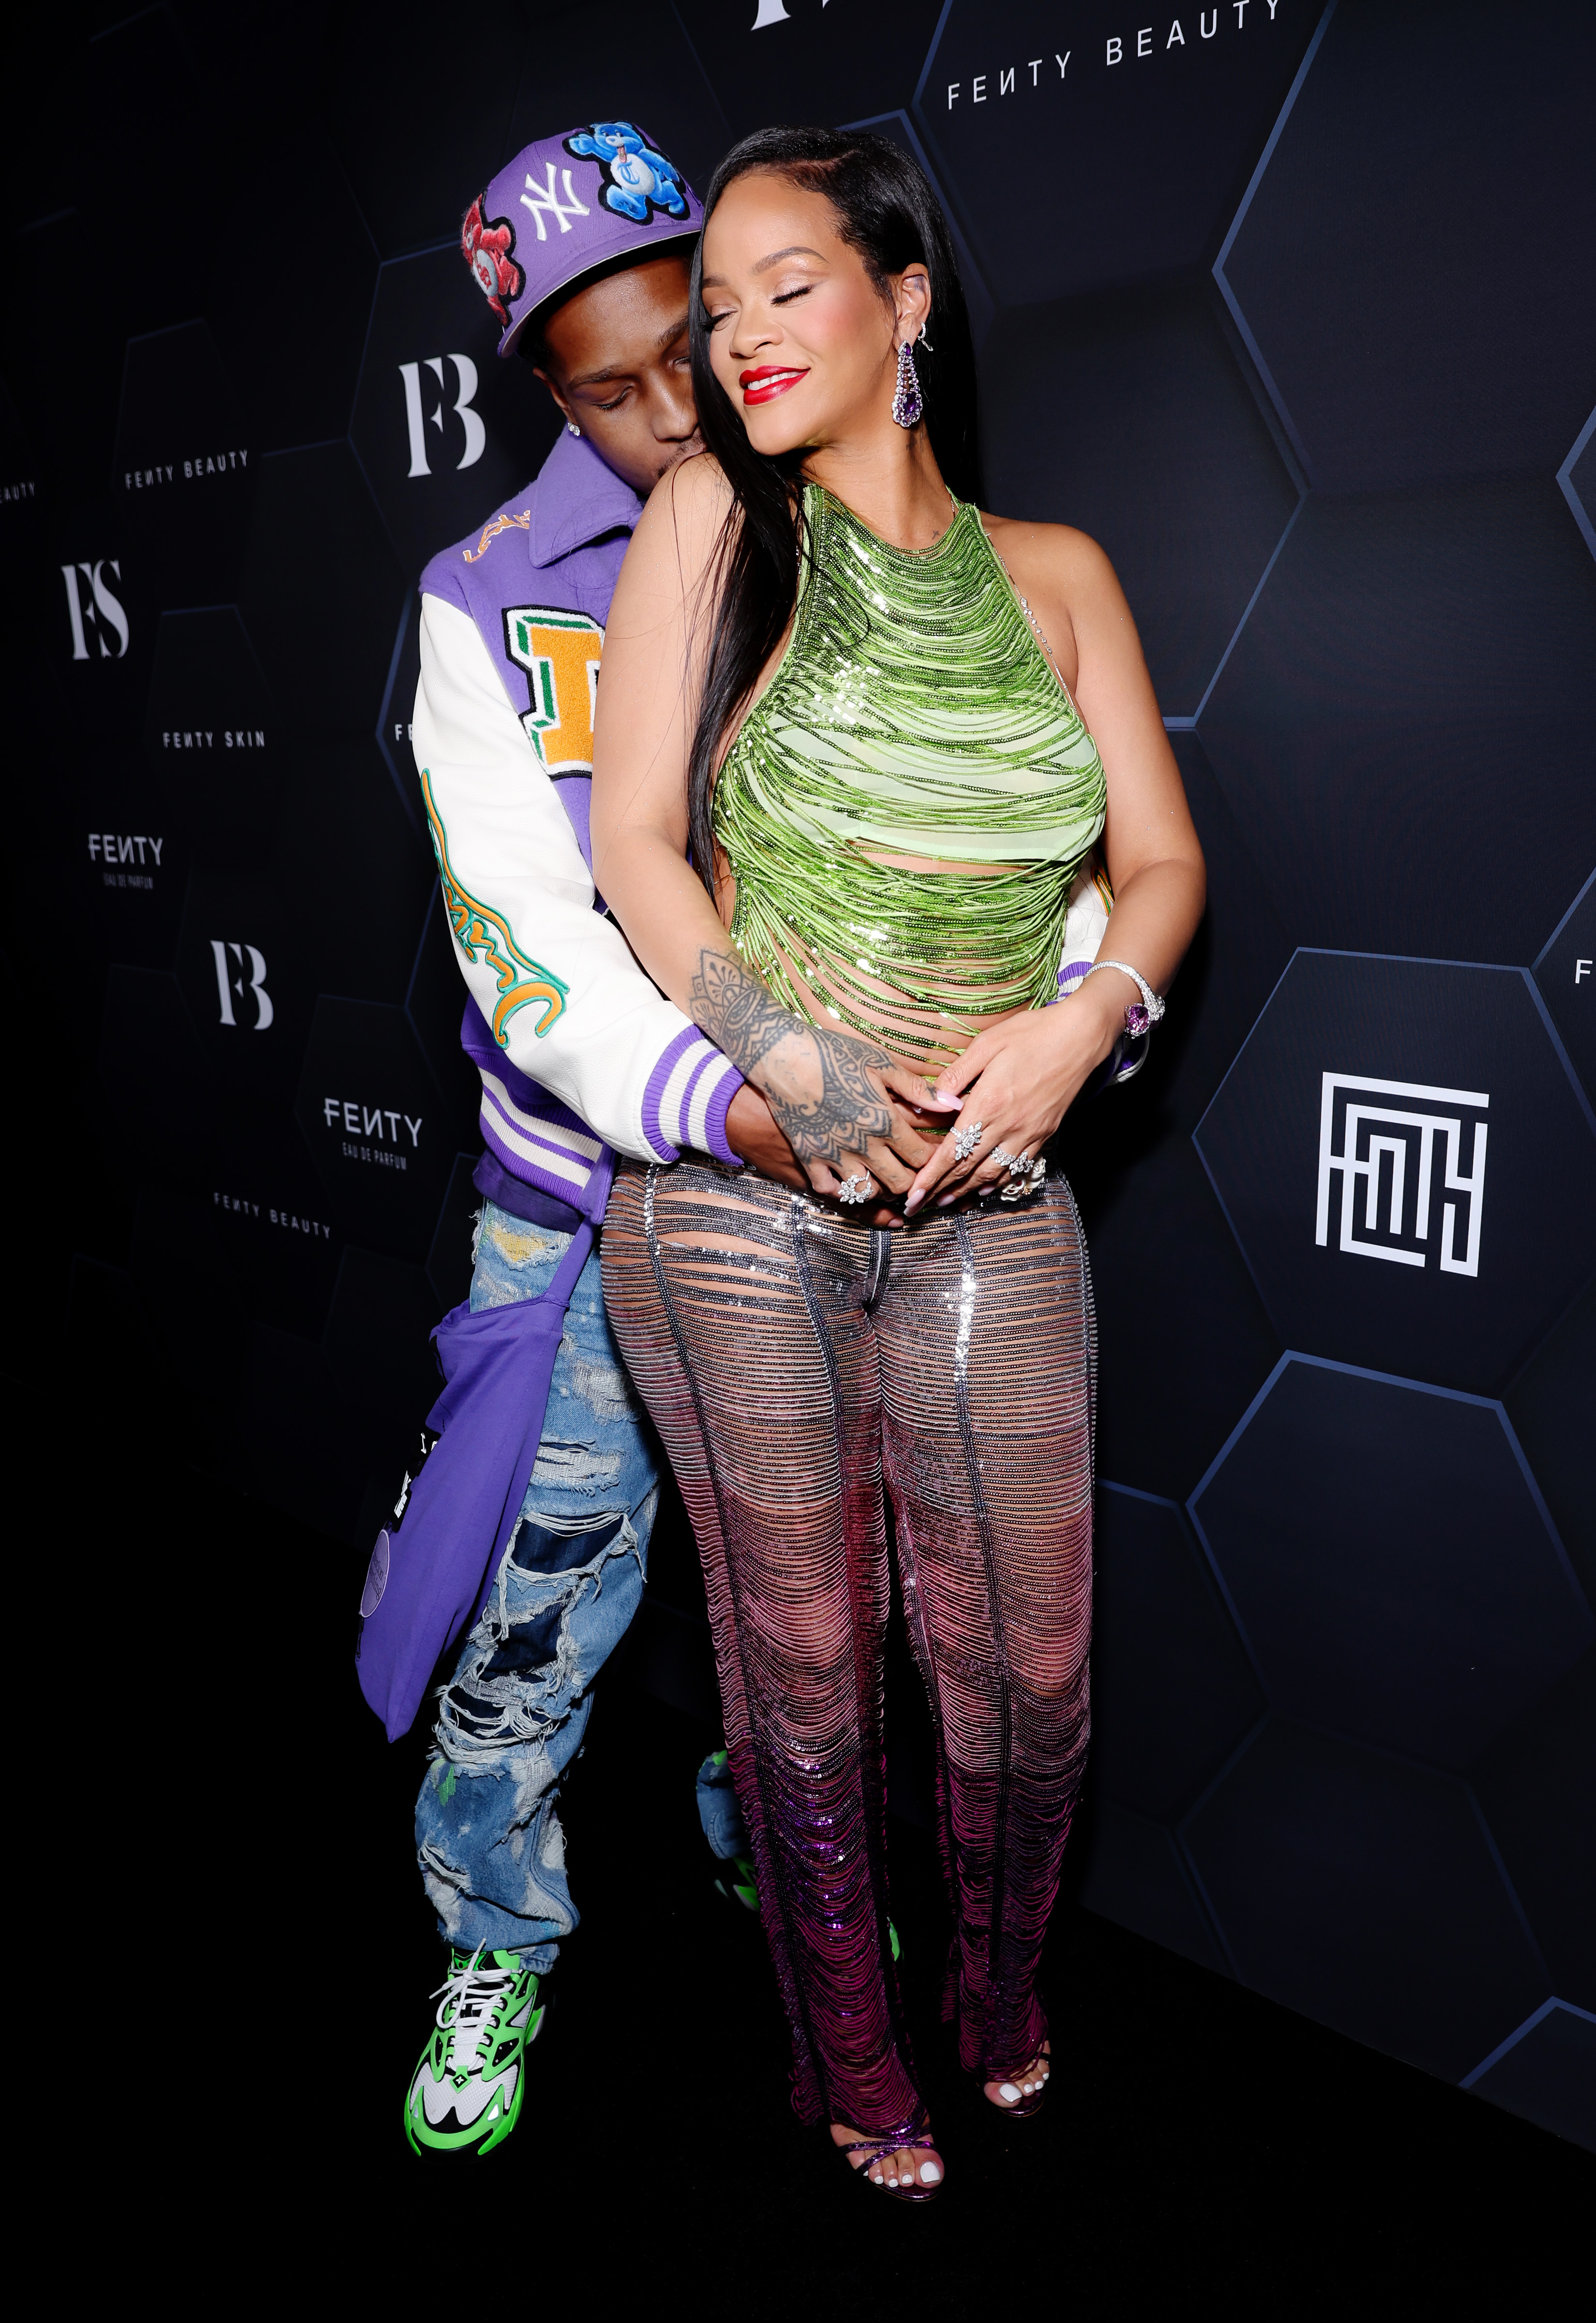 A$AP Rocky and Rihanna celebrate Fenty Beauty & Fenty Skin at Goya Studios on February 11, 2022, in Los Angeles, California. | Source: Getty Images